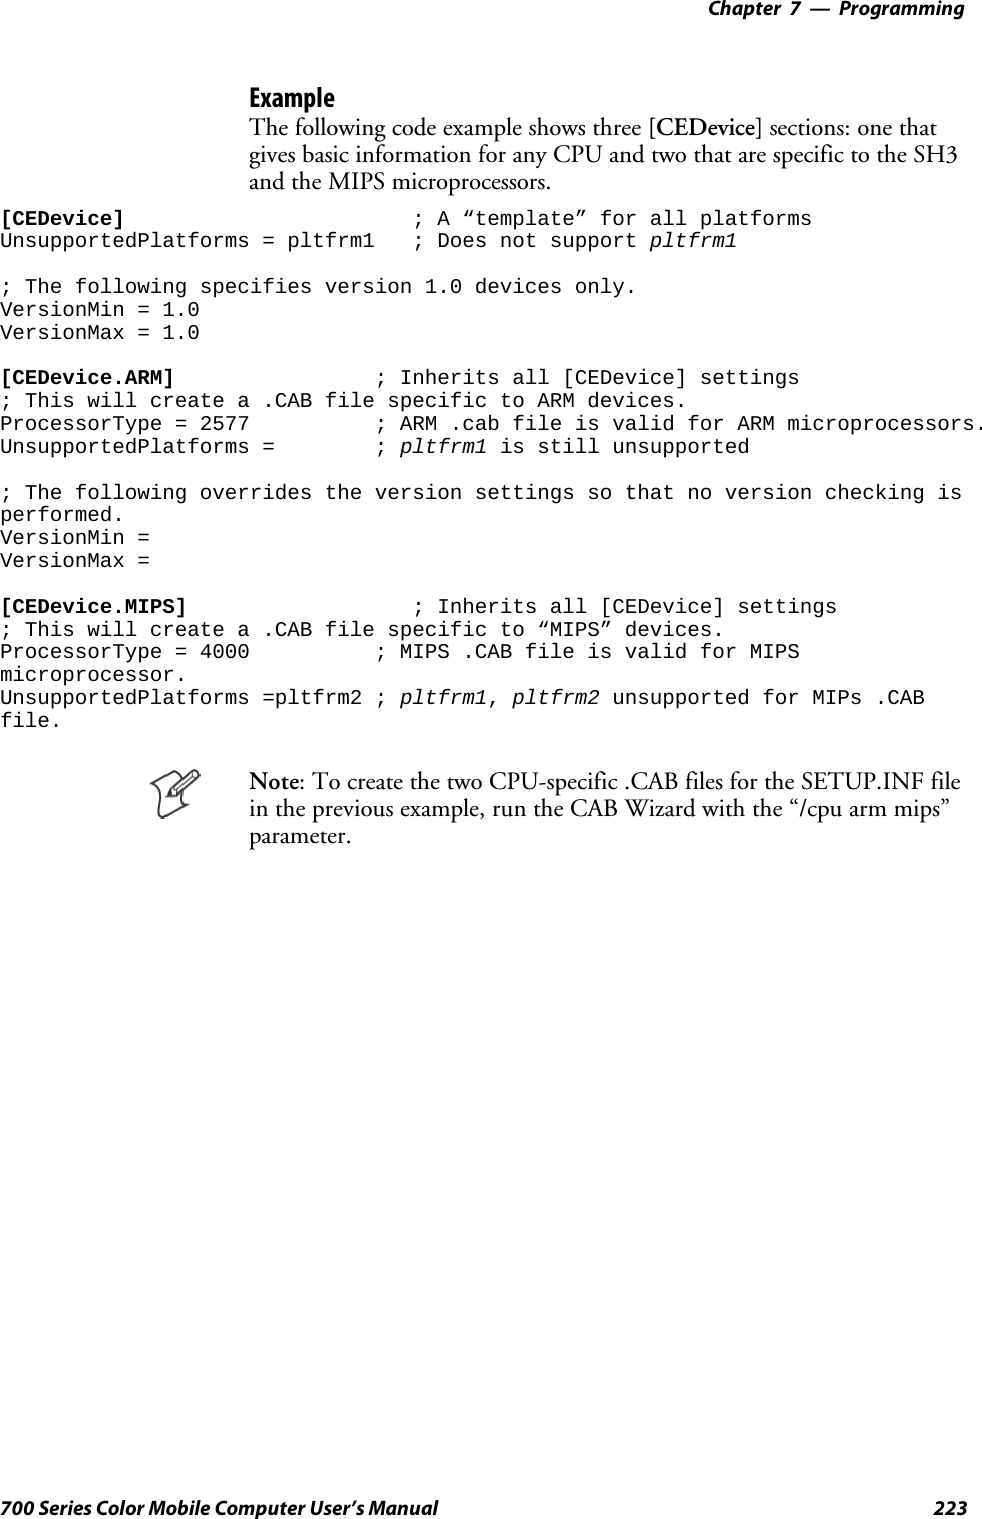 Programming—Chapter 7223700 Series Color Mobile Computer User’s ManualExampleThe following code example shows three [CEDevice] sections: one thatgives basic information for any CPU and two that are specific to the SH3and the MIPS microprocessors.[CEDevice] ; A “template” for all platformsUnsupportedPlatforms = pltfrm1 ; Does not support pltfrm1; The following specifies version 1.0 devices only.VersionMin = 1.0VersionMax = 1.0[CEDevice.ARM] ; Inherits all [CEDevice] settings; This will create a .CAB file specific to ARM devices.ProcessorType = 2577 ; ARM .cab file is valid for ARM microprocessors.UnsupportedPlatforms = ; pltfrm1 is still unsupported; The following overrides the version settings so that no version checking isperformed.VersionMin =VersionMax =[CEDevice.MIPS] ; Inherits all [CEDevice] settings; This will create a .CAB file specific to “MIPS” devices.ProcessorType = 4000 ; MIPS .CAB file is valid for MIPSmicroprocessor.UnsupportedPlatforms =pltfrm2 ; pltfrm1,pltfrm2 unsupported for MIPs .CABfile.Note:TocreatethetwoCPU-specific.CABfilesfortheSETUP.INFfilein the previous example, run the CAB Wizard with the “/cpu arm mips”parameter.